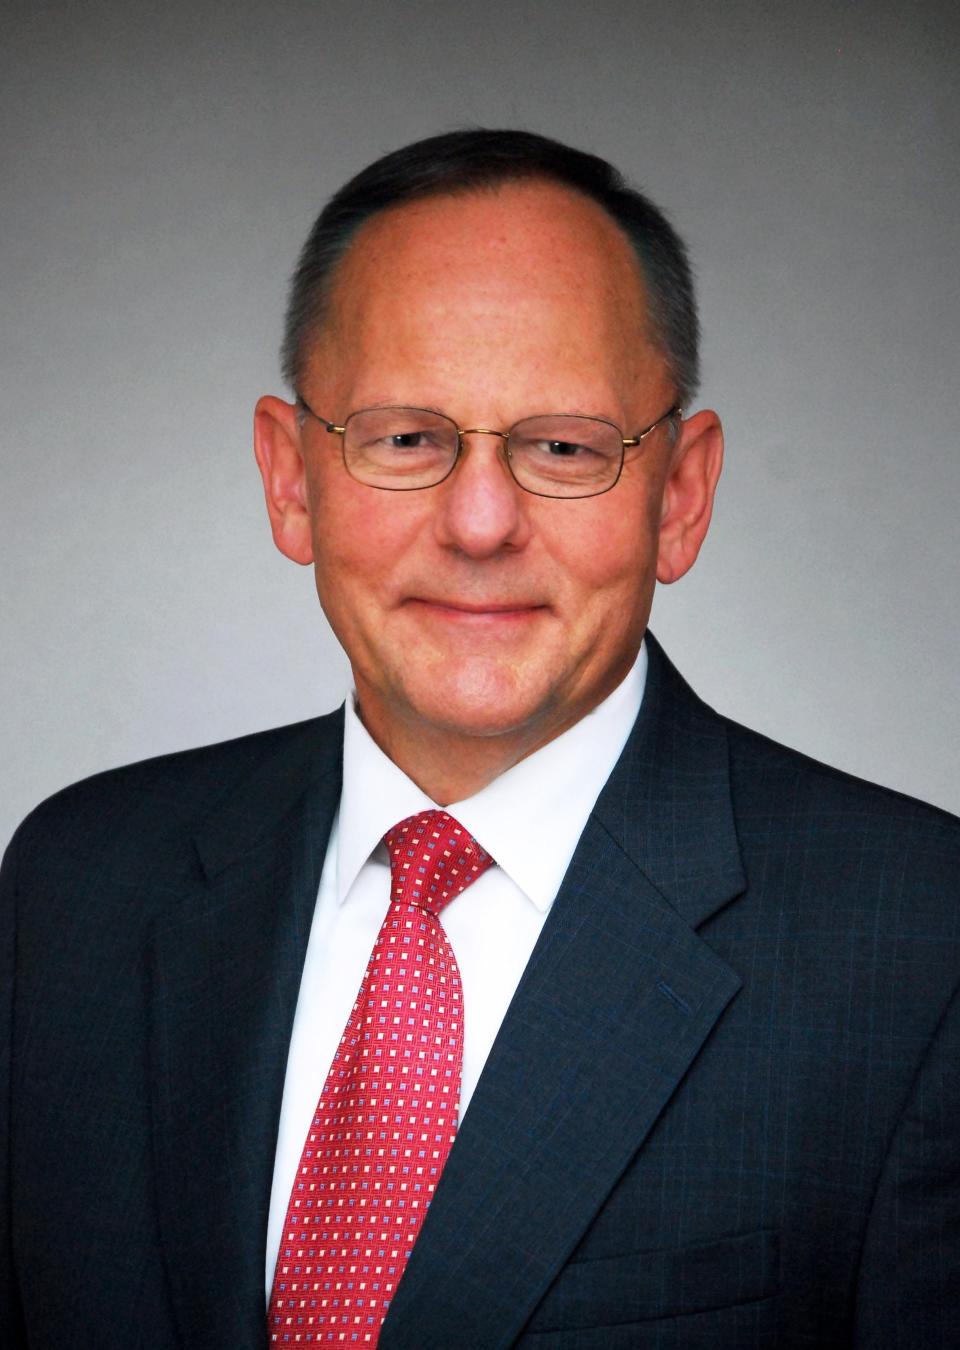 John A. Carey has led the Palm Beach County Office of Inspector General since 2014.